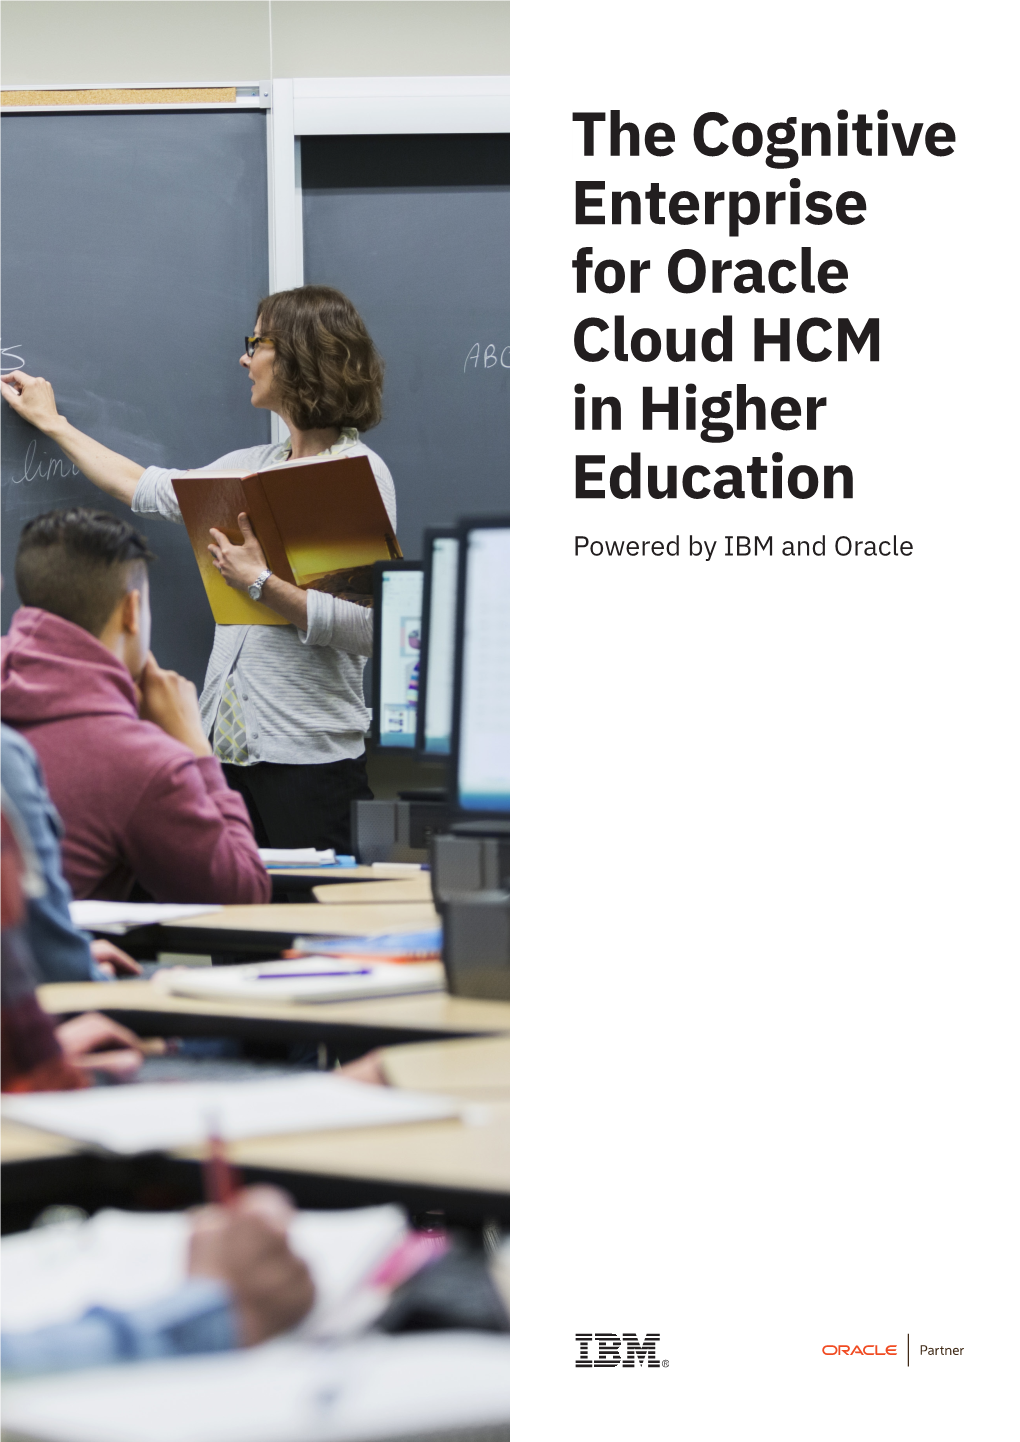 The Cognitive Enterprise for Oracle Cloud HCM in Higher Education Powered by IBM and Oracle